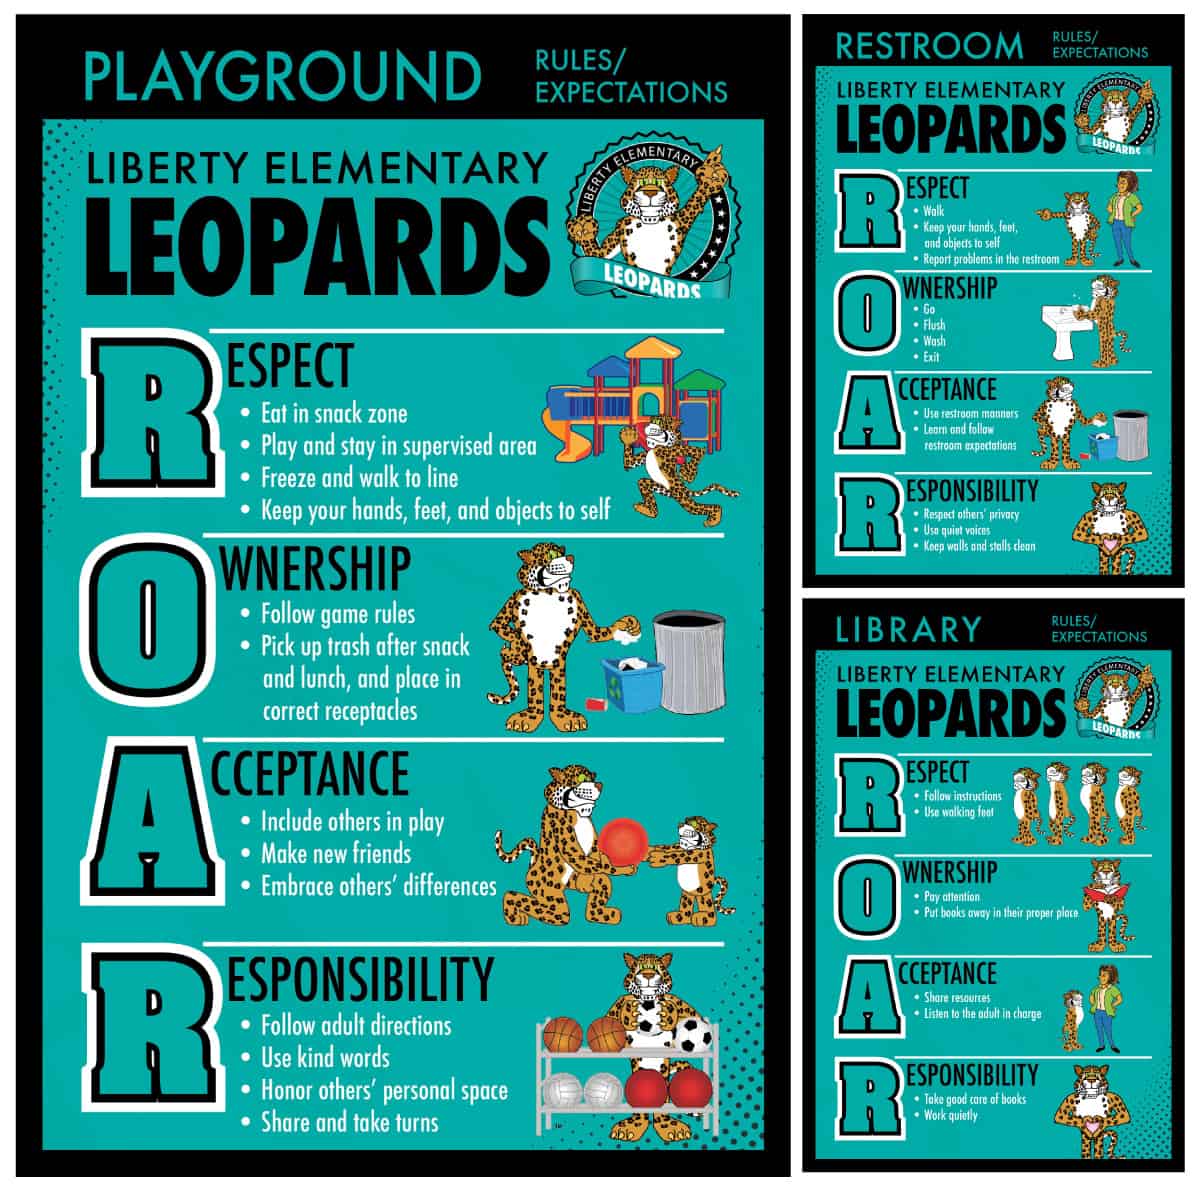 Rules-posters_LEOPARD